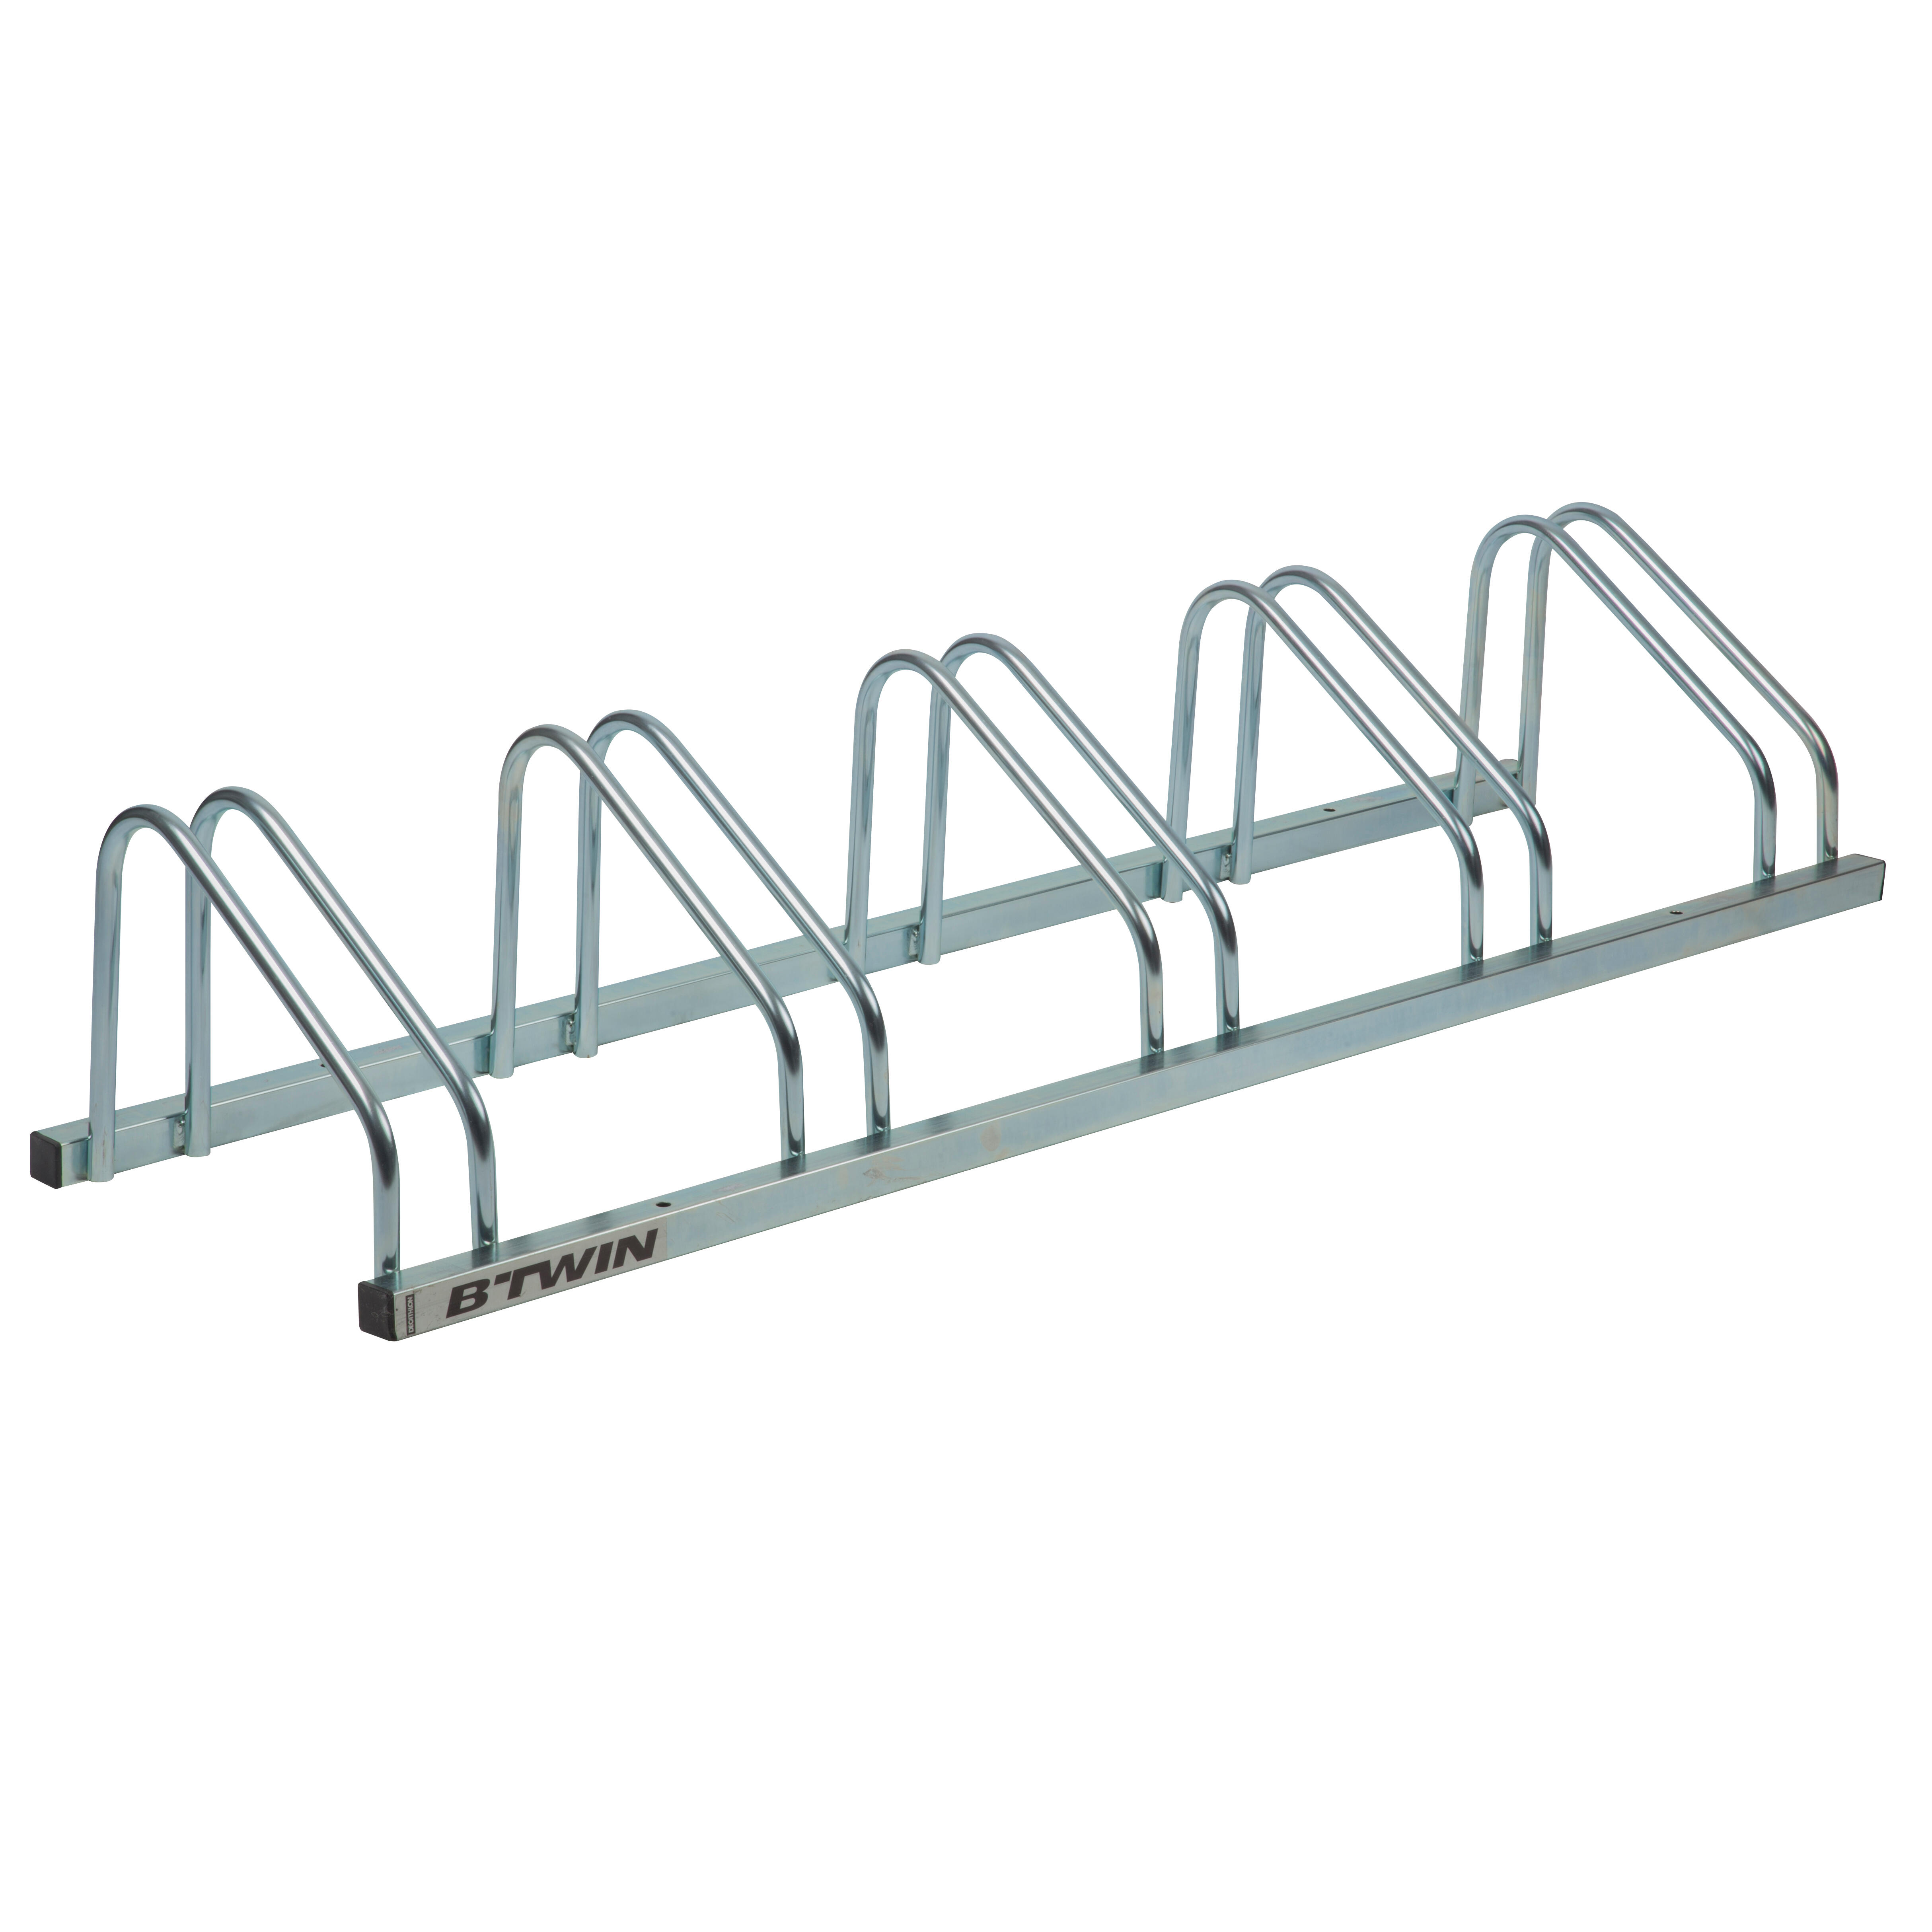 cycle stand for car decathlon